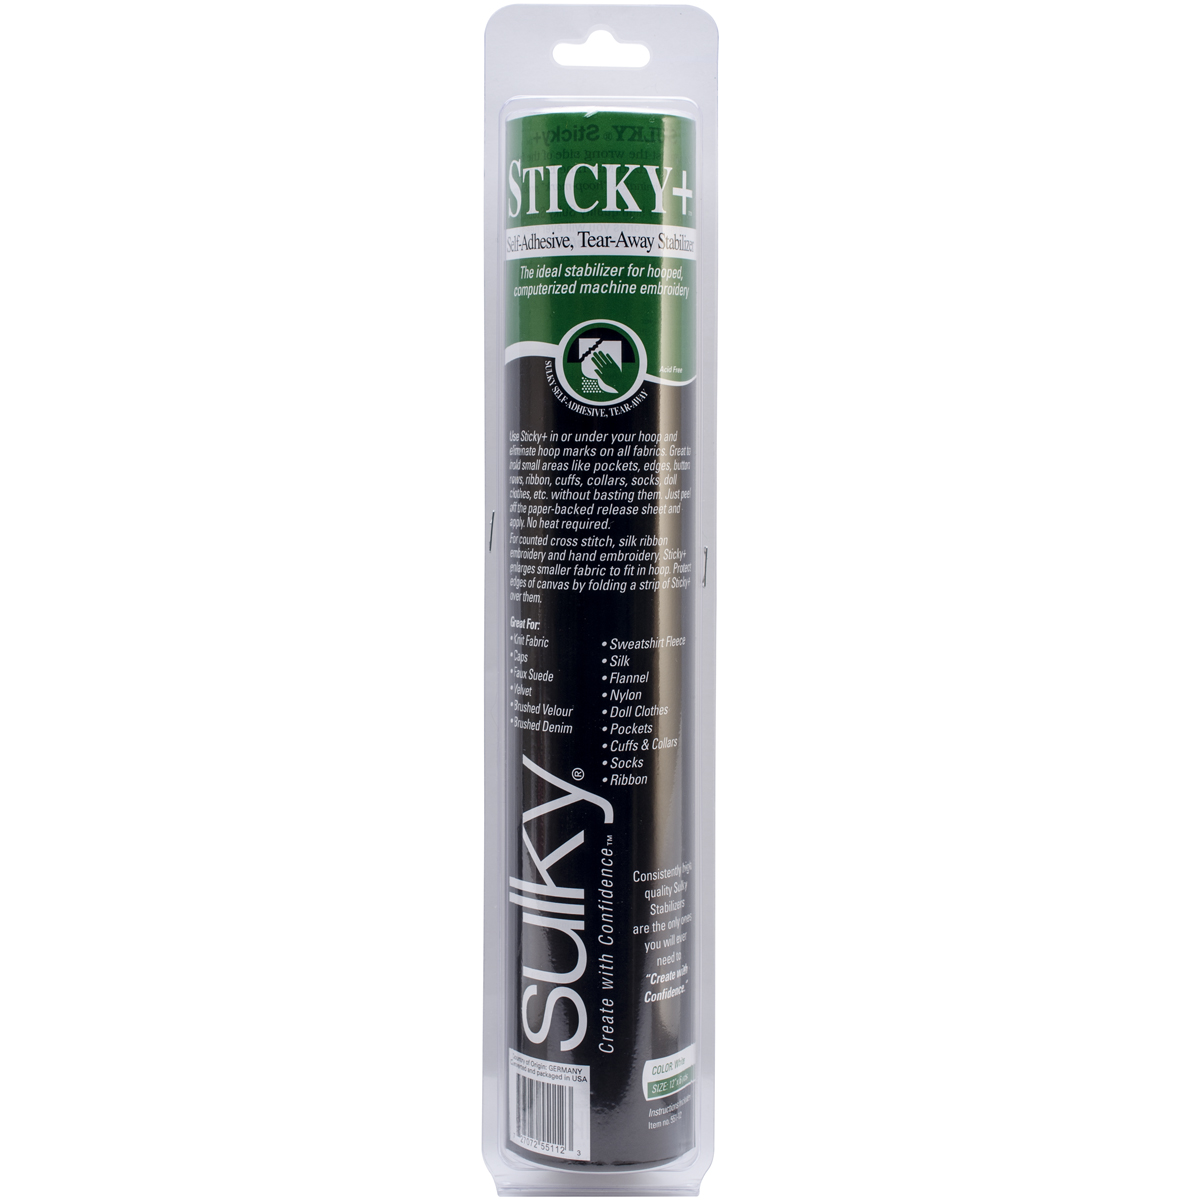 Sulky Sticky Self-Adhesive Tear-Away Stabilizer Roll, 12" X 6 Yds - image 2 of 2